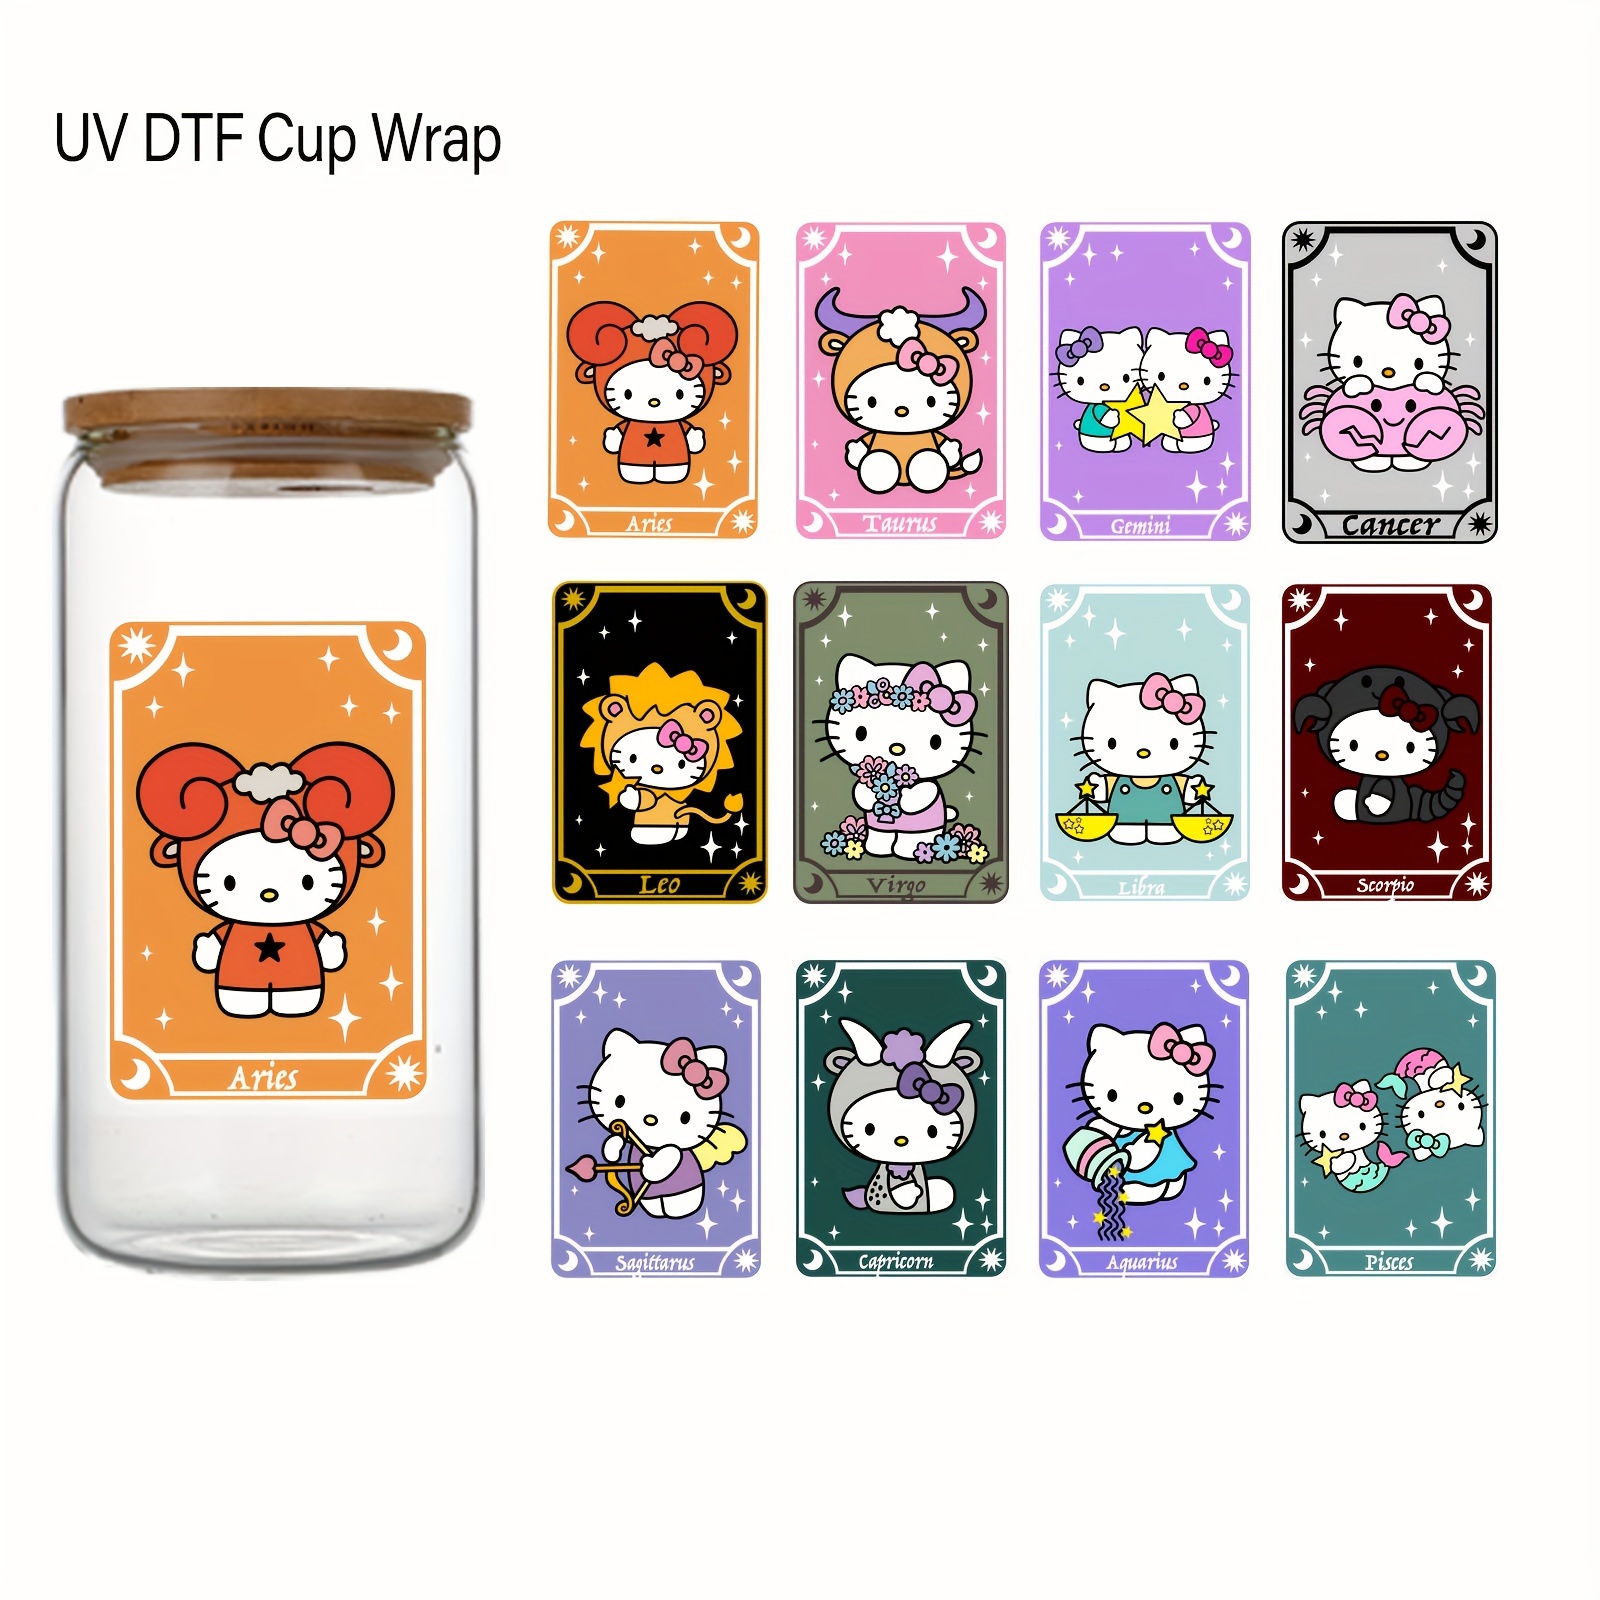 Sanrio Hello Kitty Anime Cup Wrap, Ready to use Glass Cup Wrap